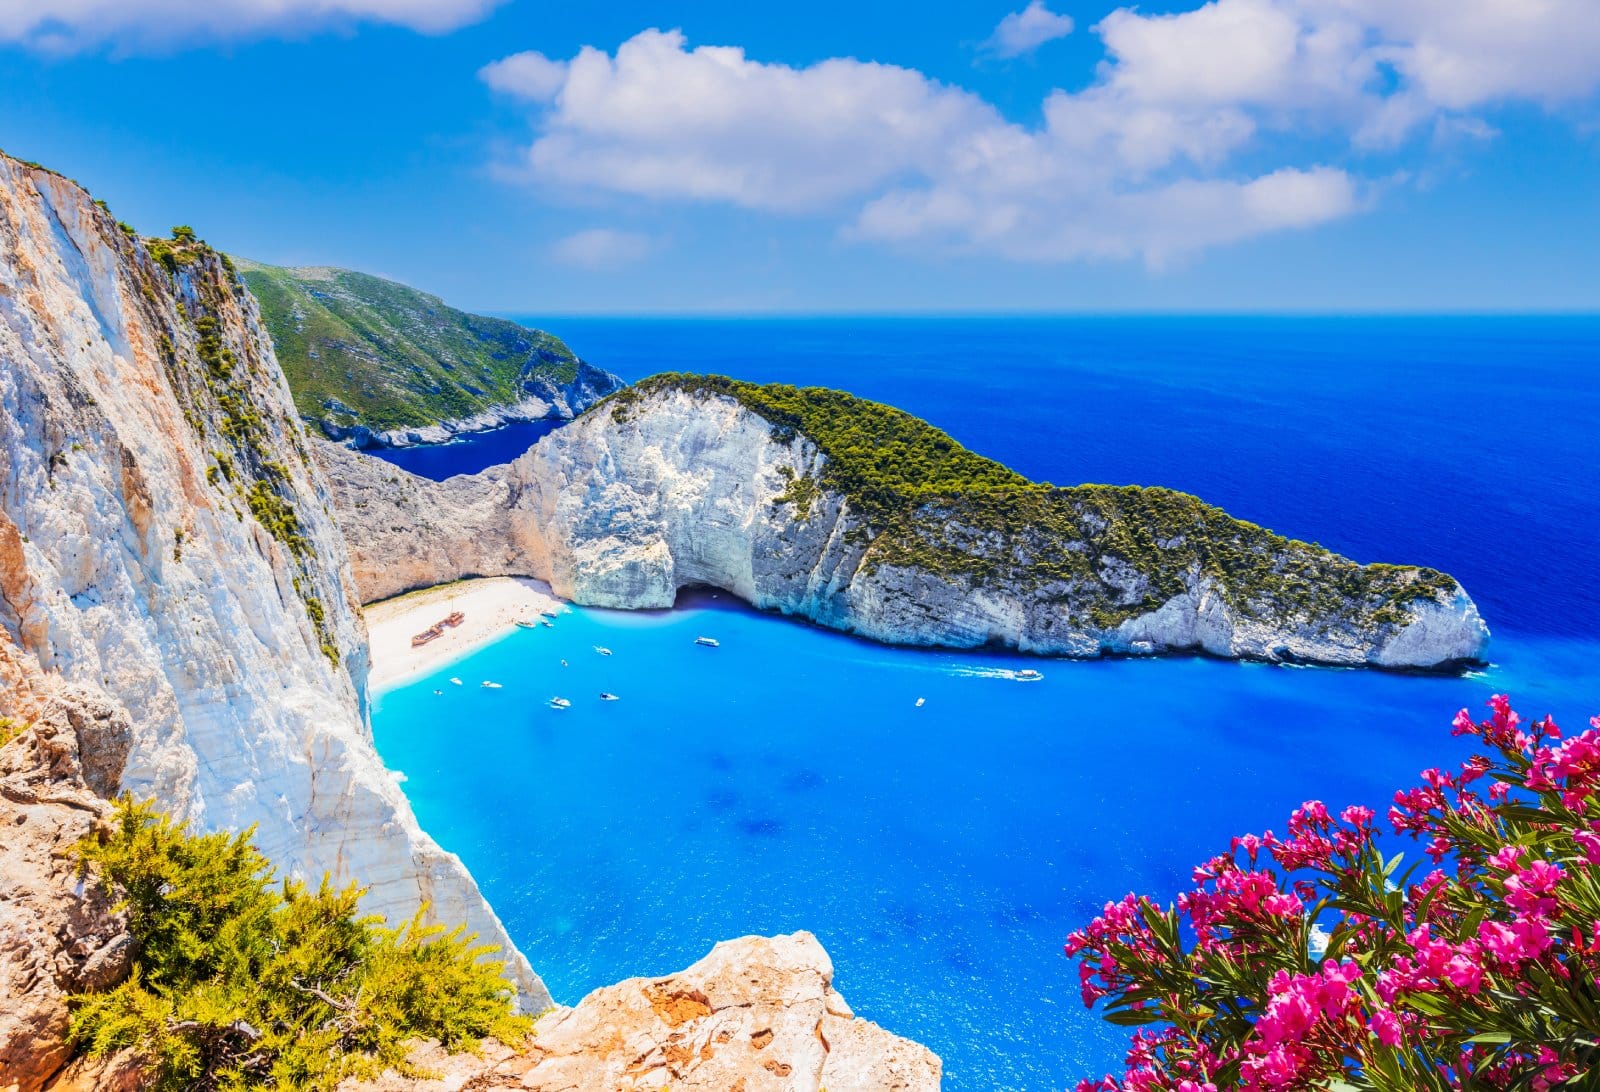 Image Credit: Shutterstock / SCStock <p>Greek islands like Zante and Mykonos are tired of the mess left behind by British partygoers. Reports of vandalism and public disturbances have led to a crackdown on unruly tourists.</p>